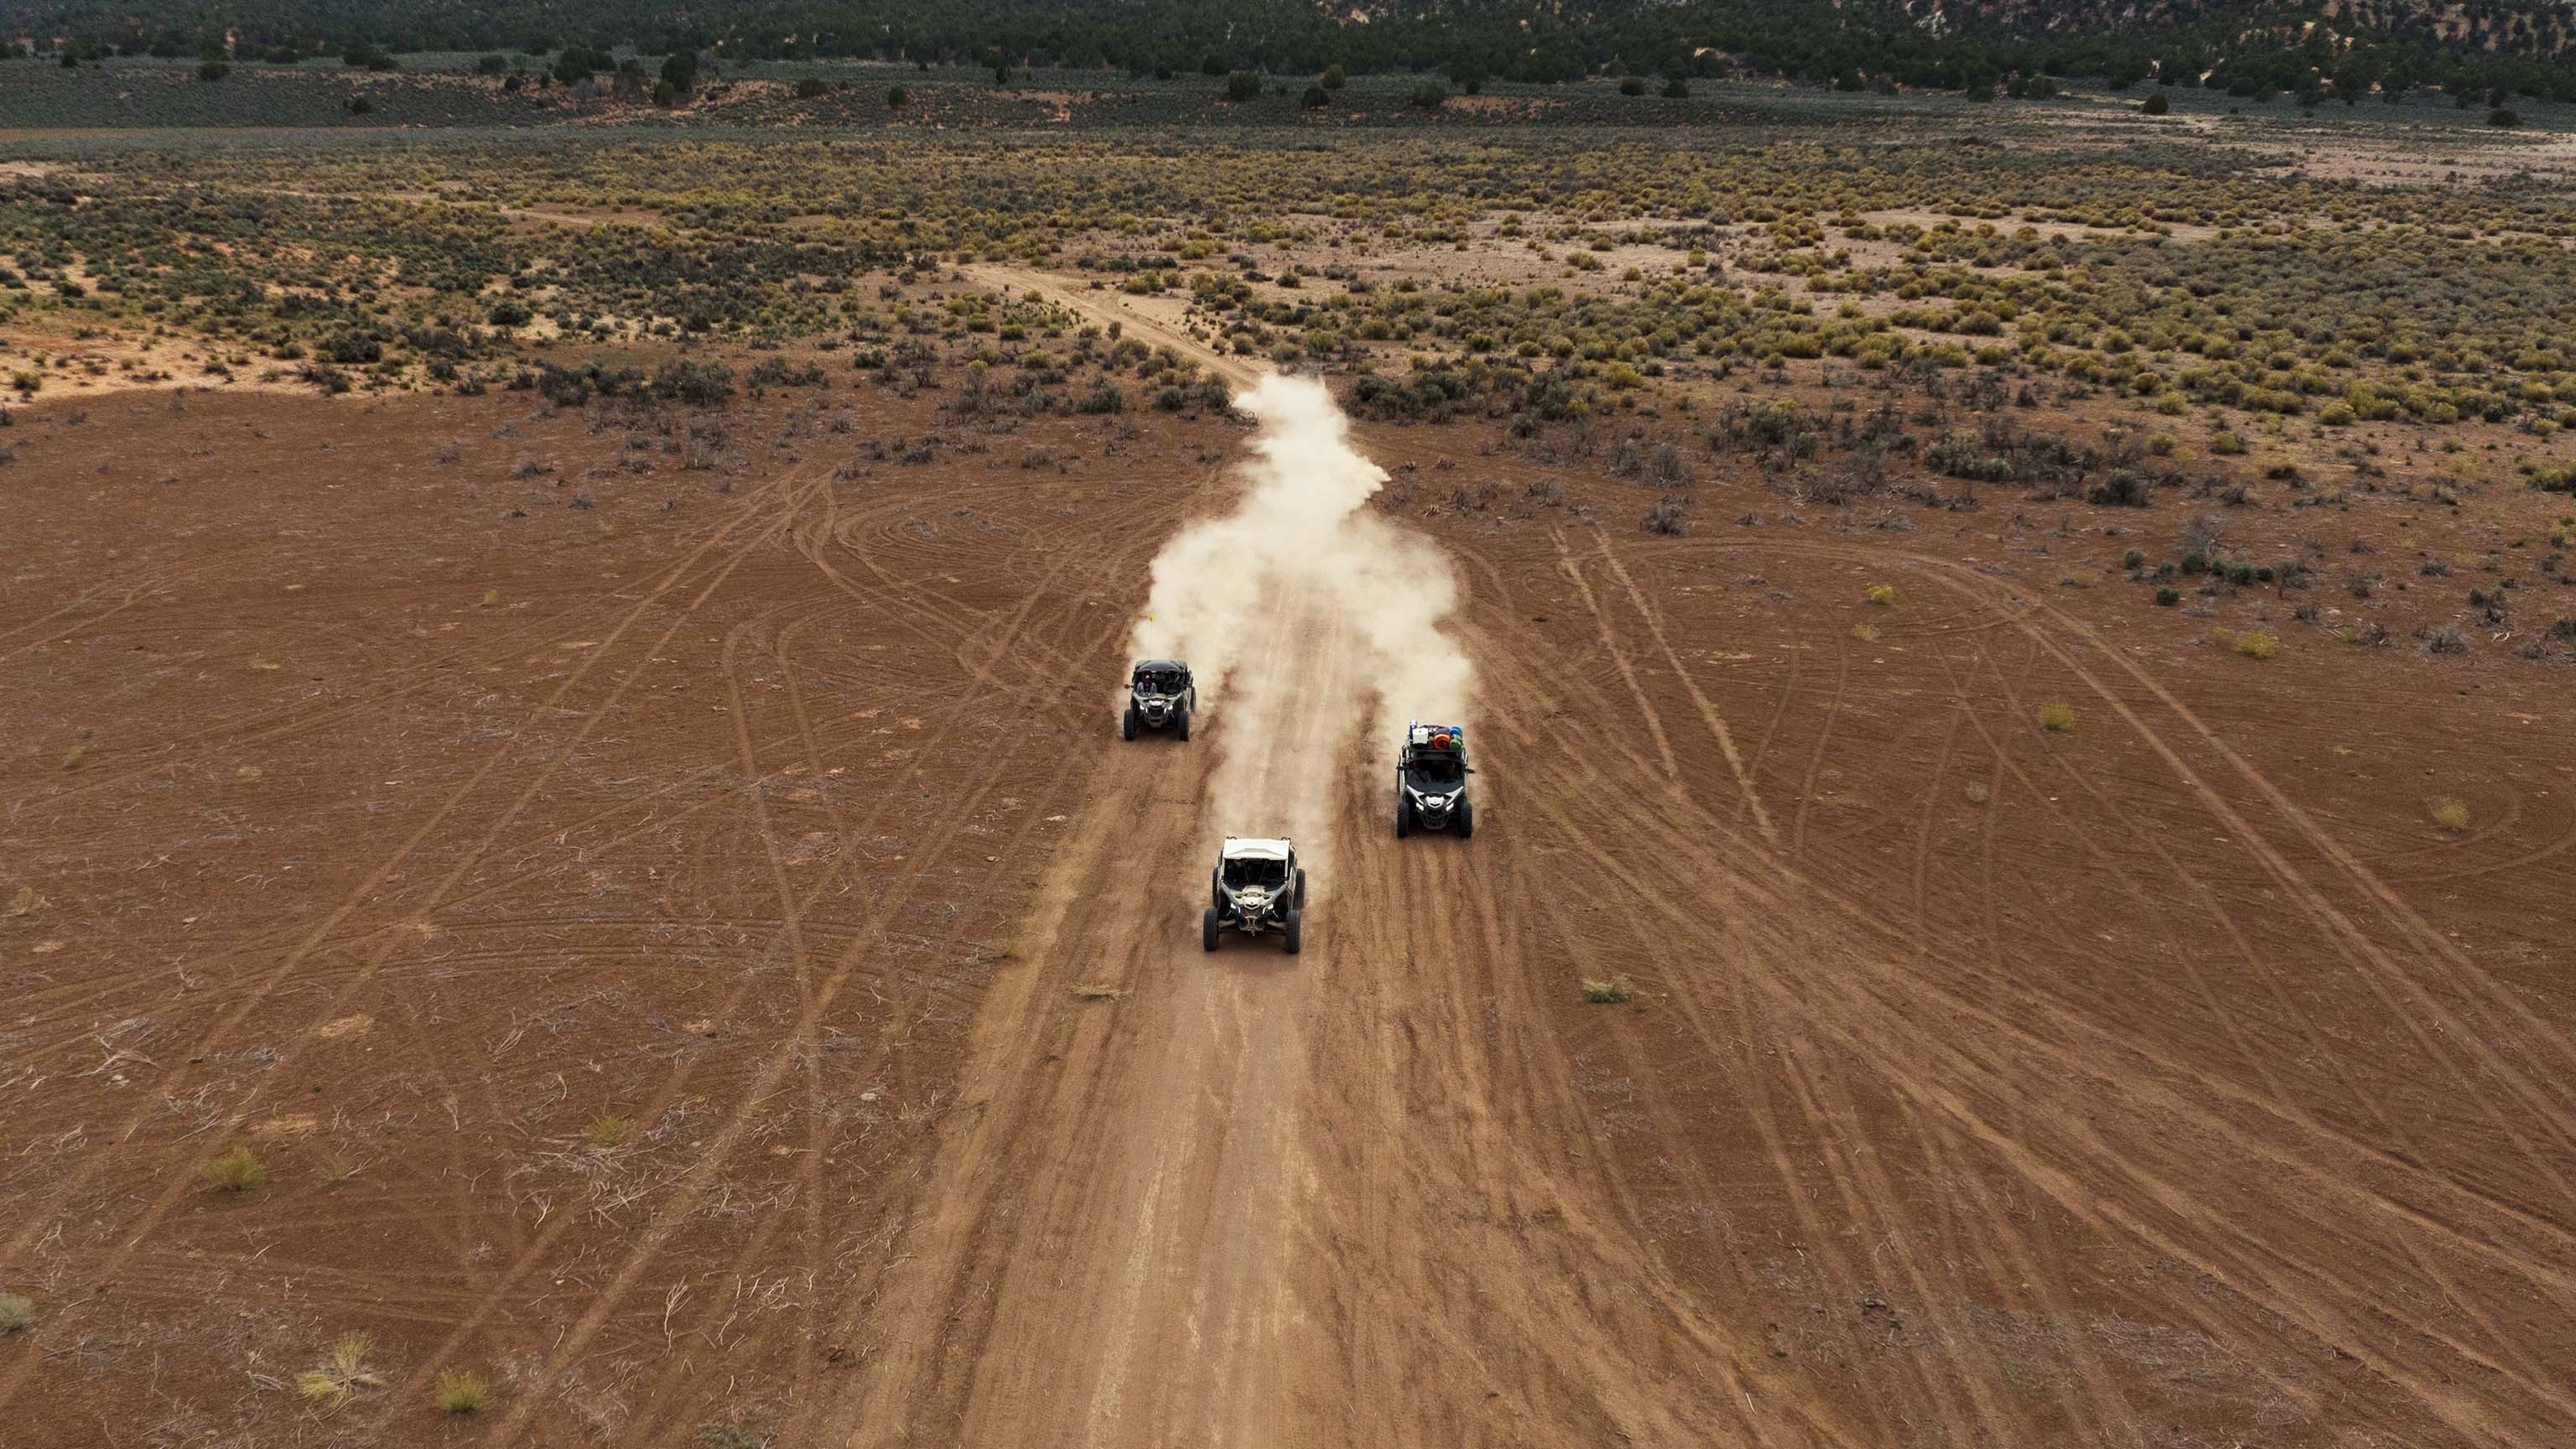 Arial view of three Can-Am side-by-sides on a path in a desert setting. 